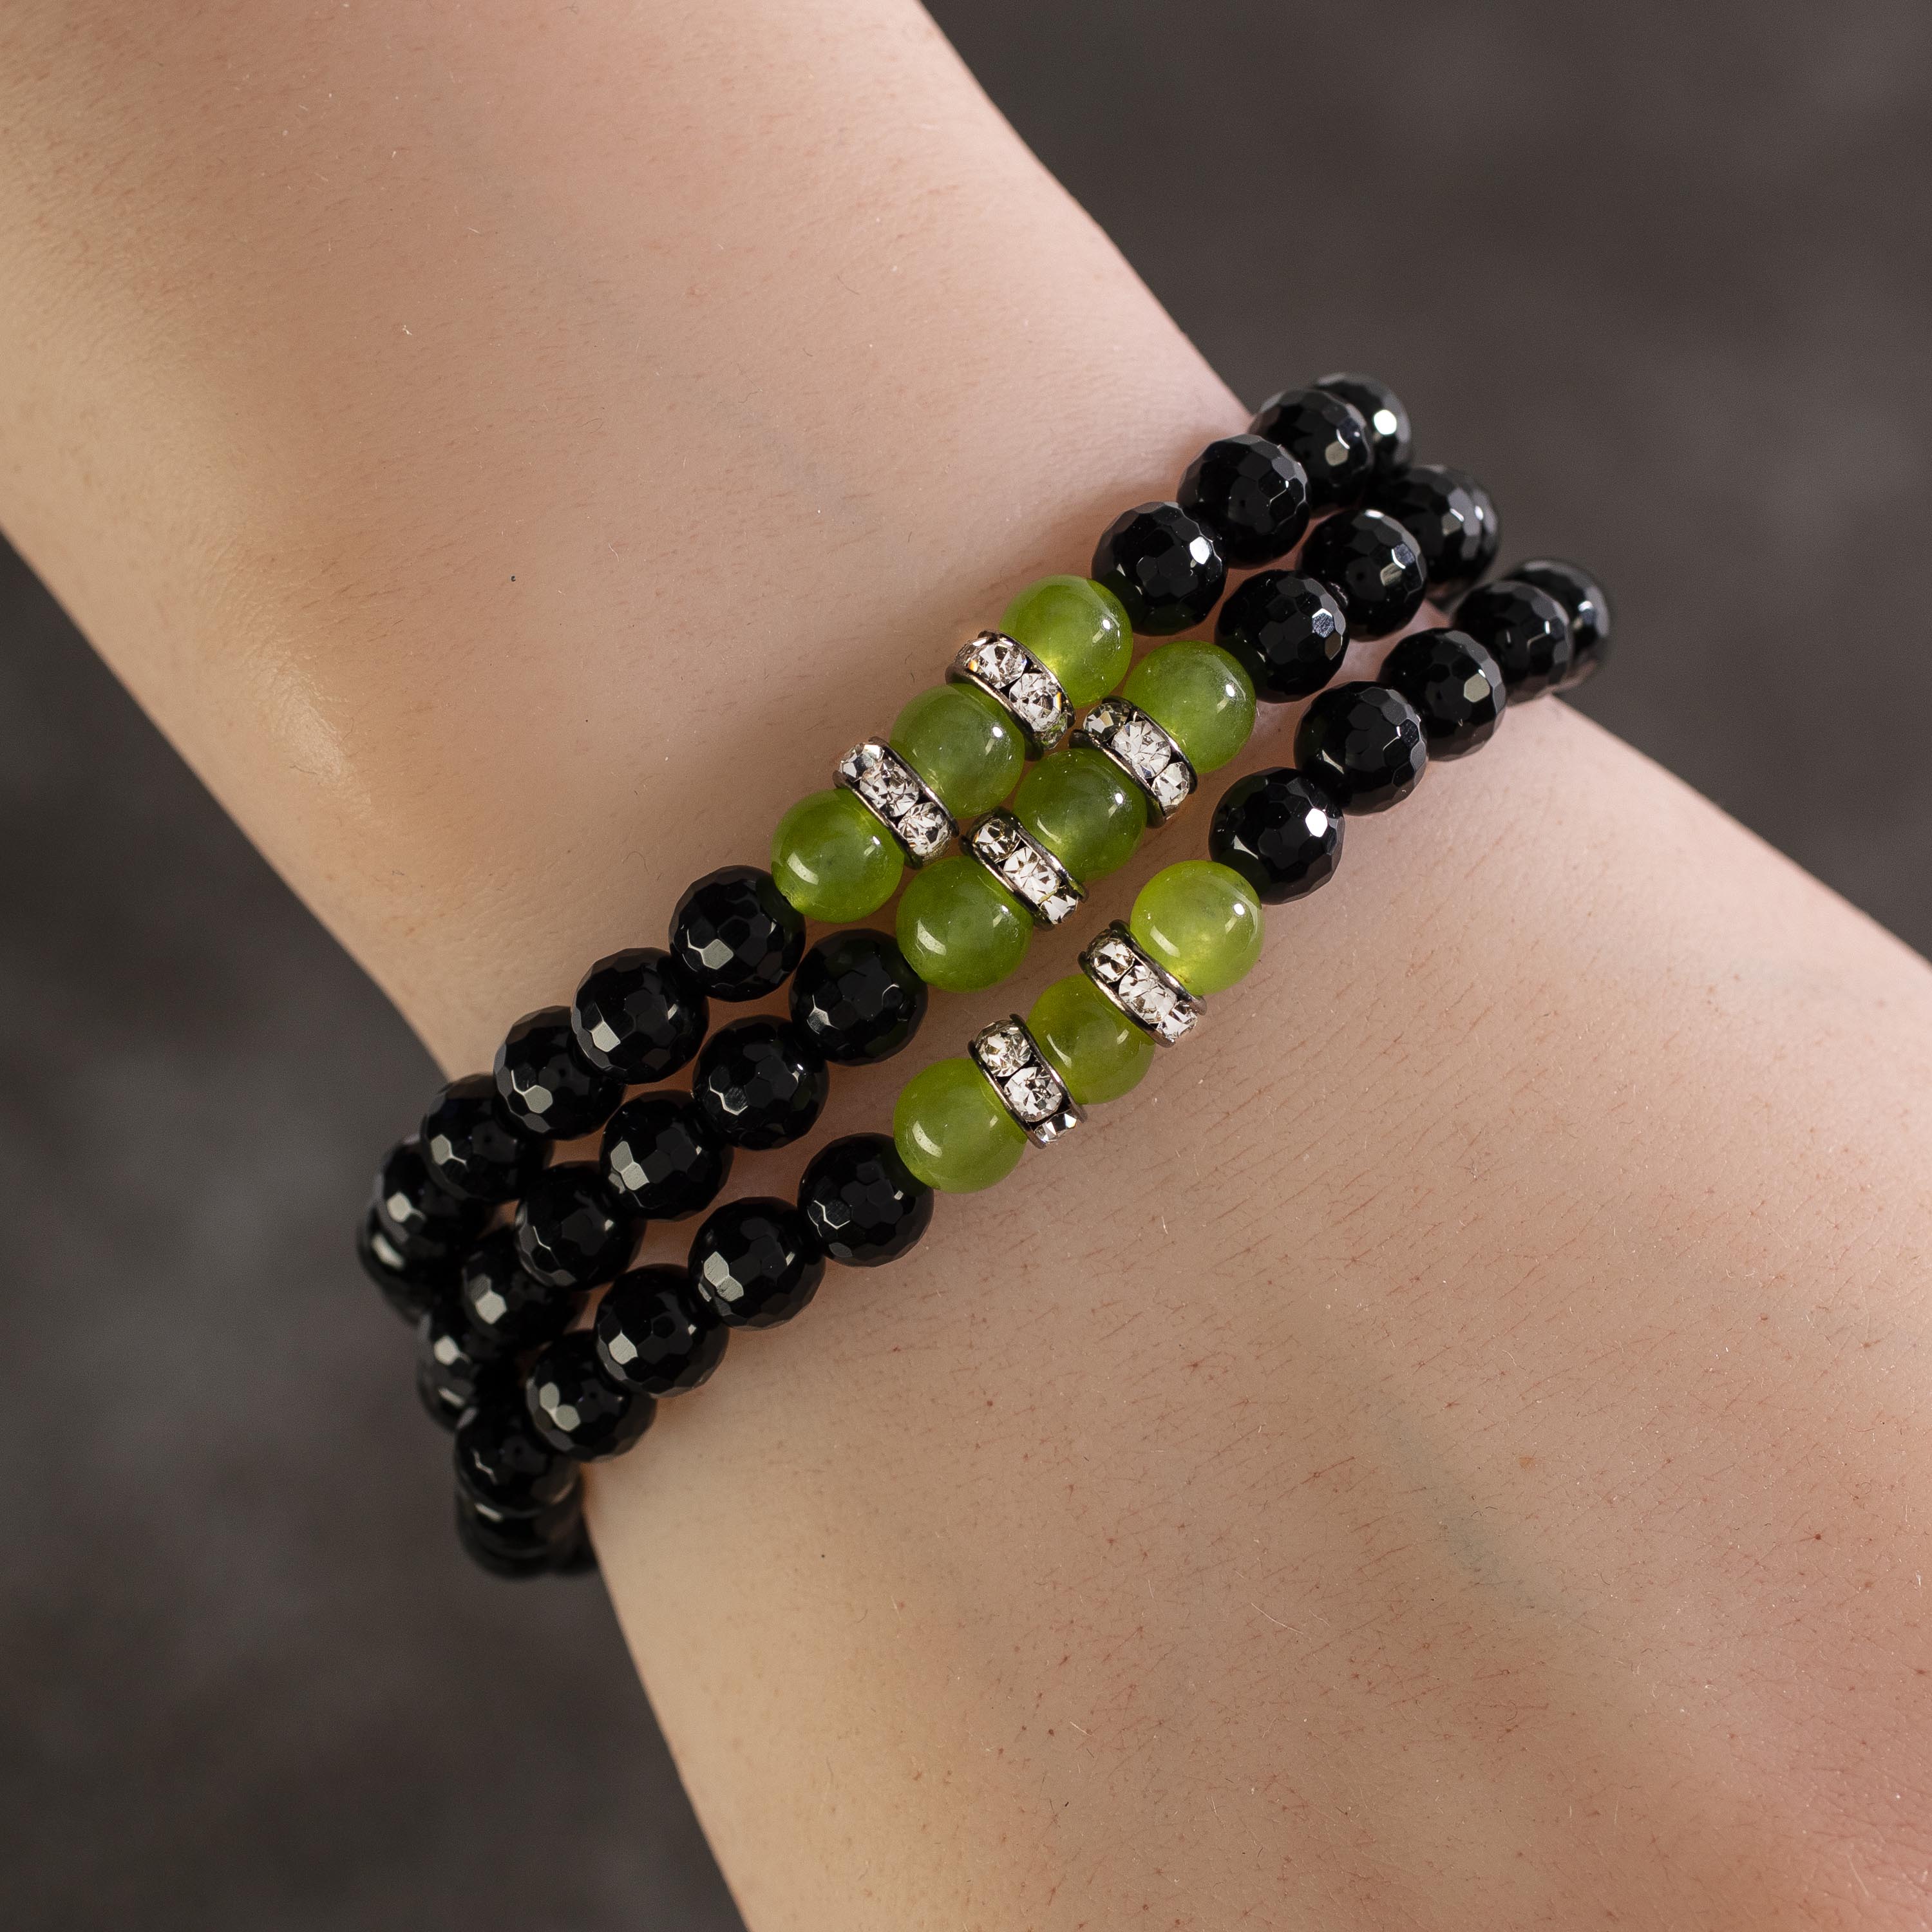 Kalifano Gemstone Bracelets Faceted Black Agate 6mm Beads with Green Agate and Crystal Accent Beads Triple Wrap Elastic Gemstone Bracelet WHITE-BGI3-042